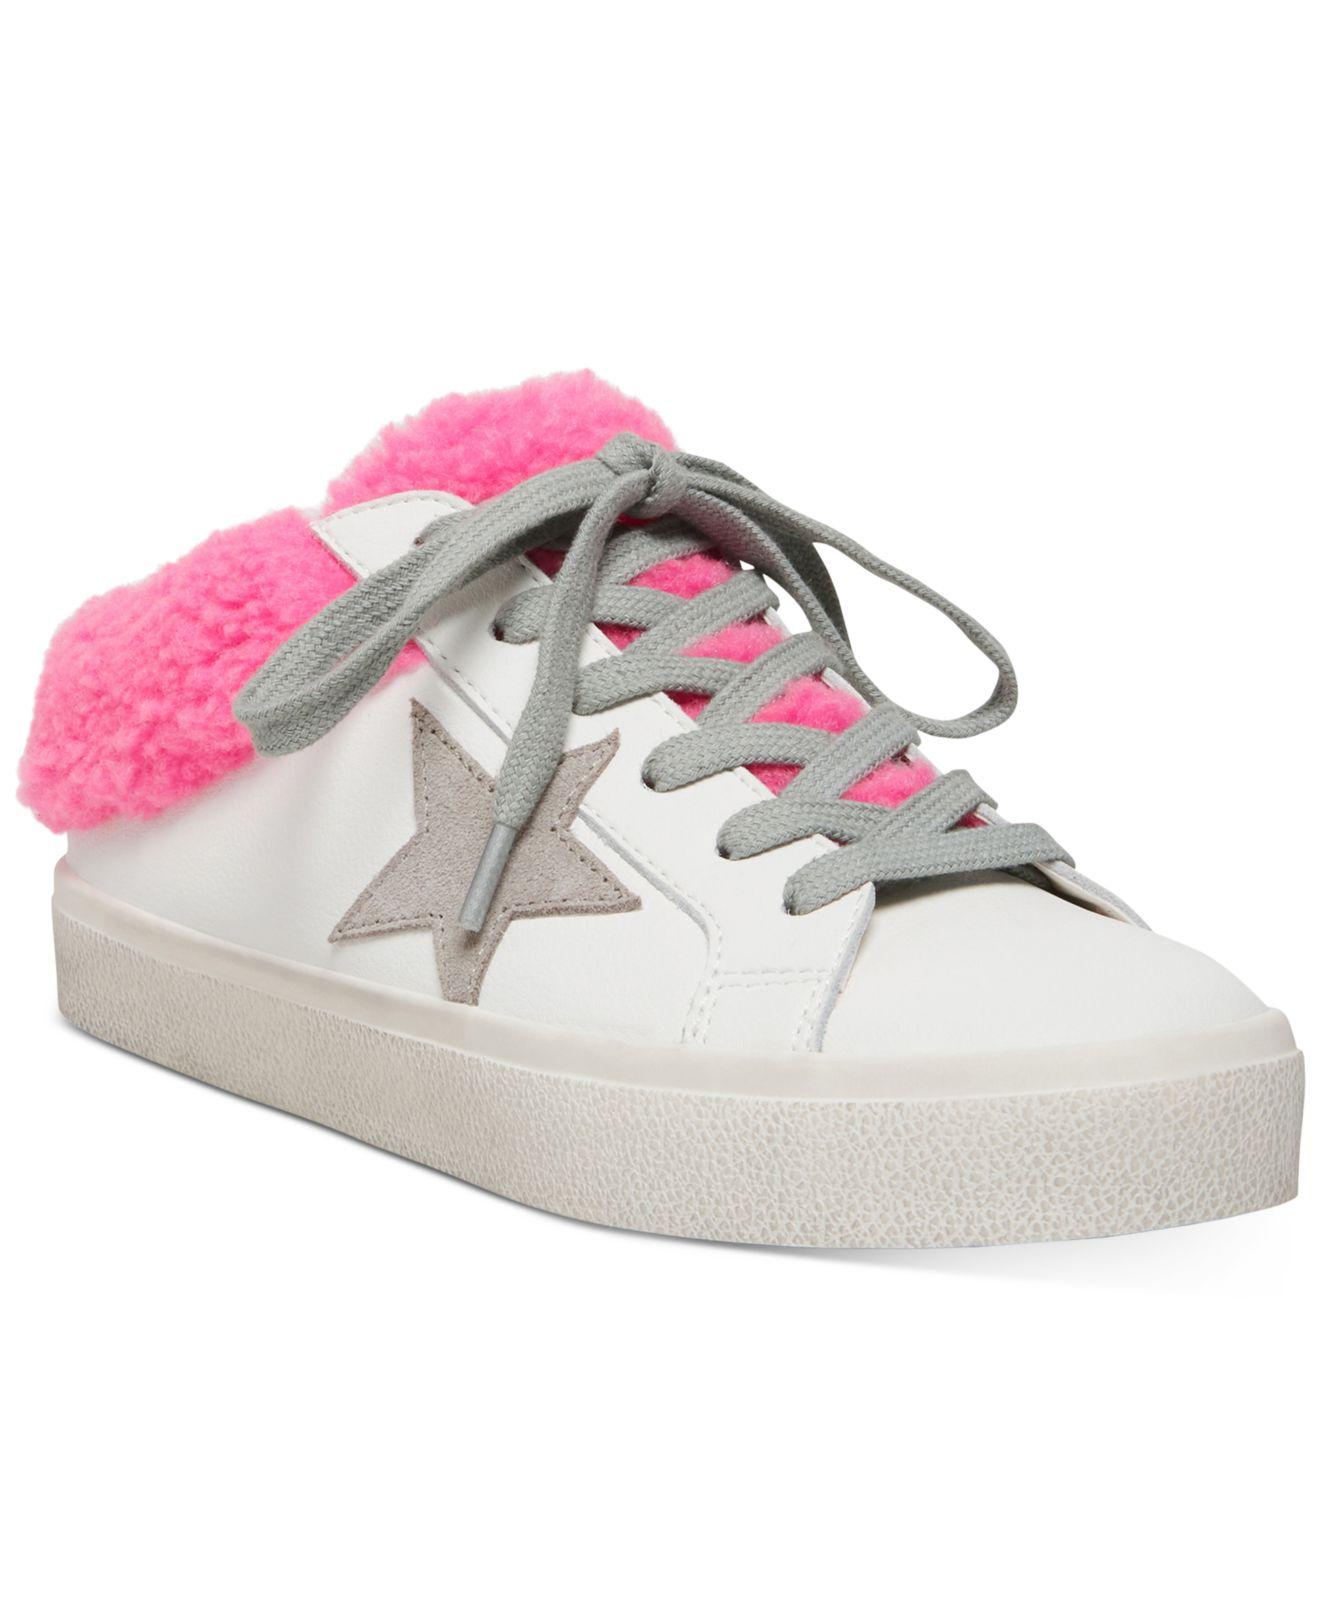 Steve Madden Polaris Faux-fur Backless Sneakers in White/Pink (Pink) | Lyst